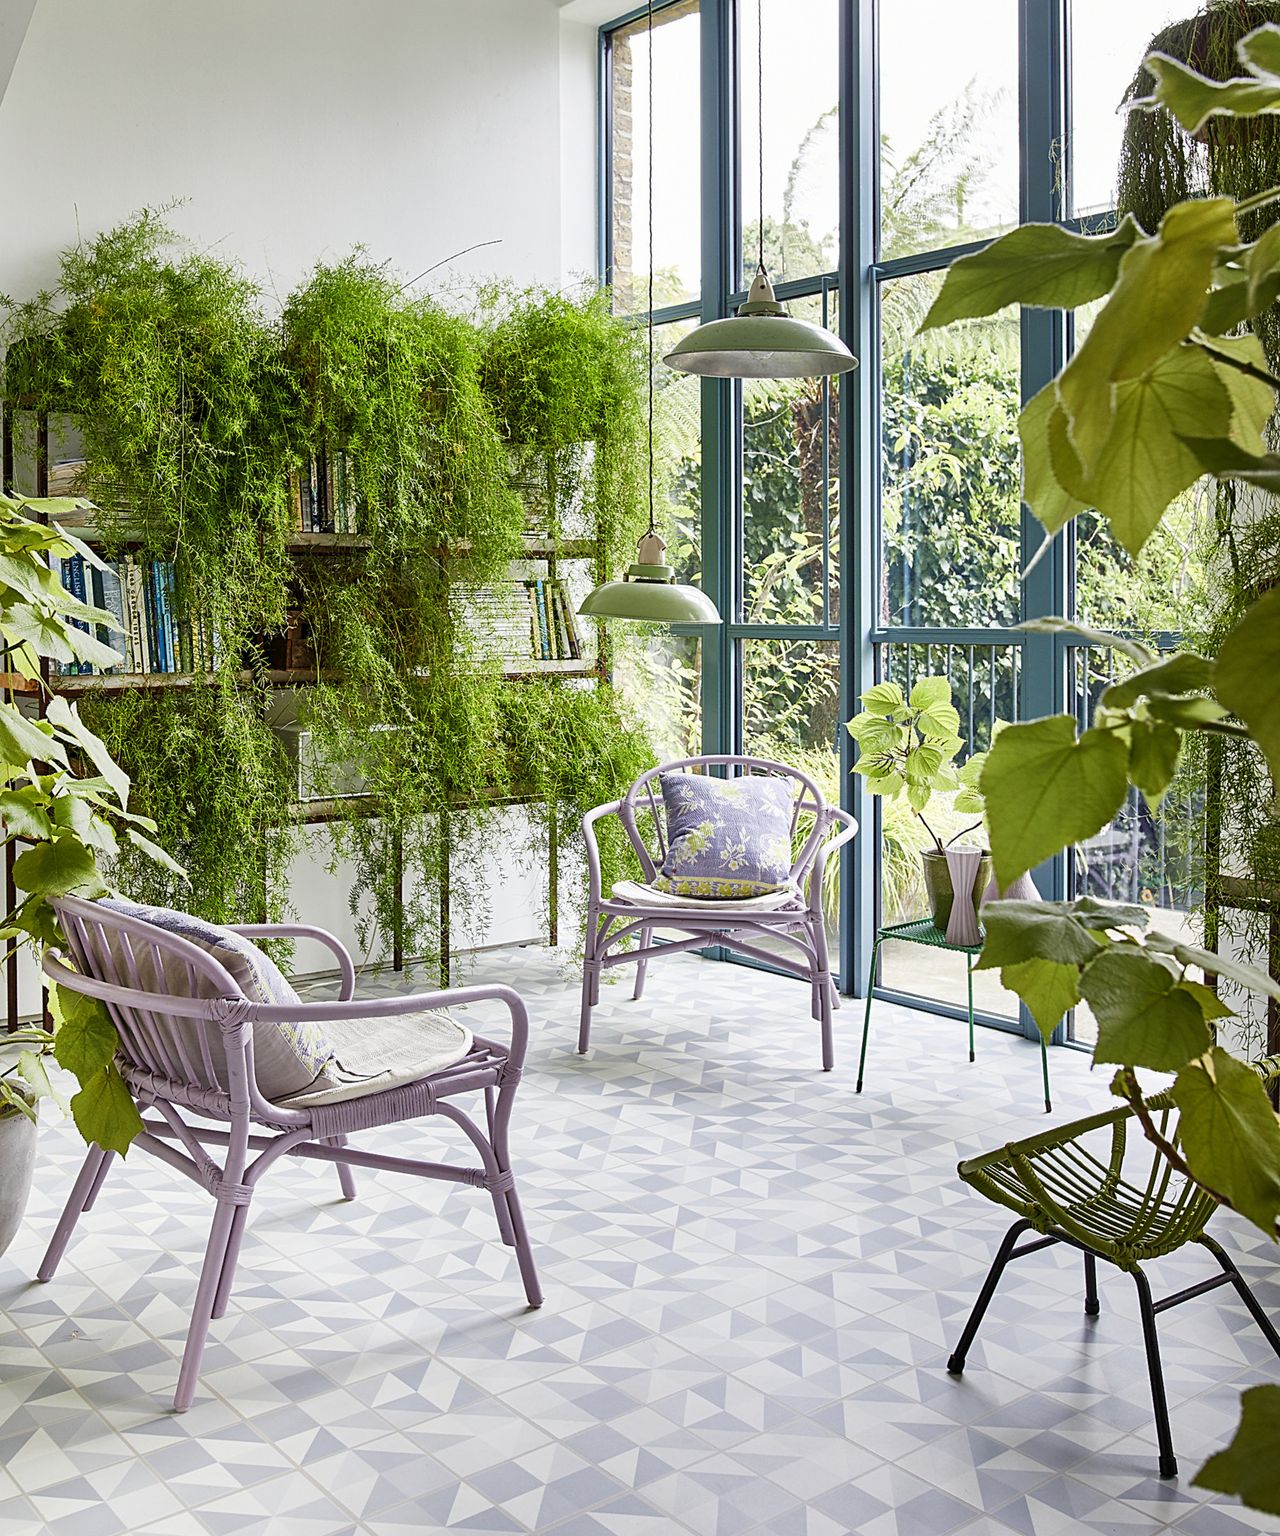 Conservatory ideas: 30 designs, plus expert planning advice | Real Homes